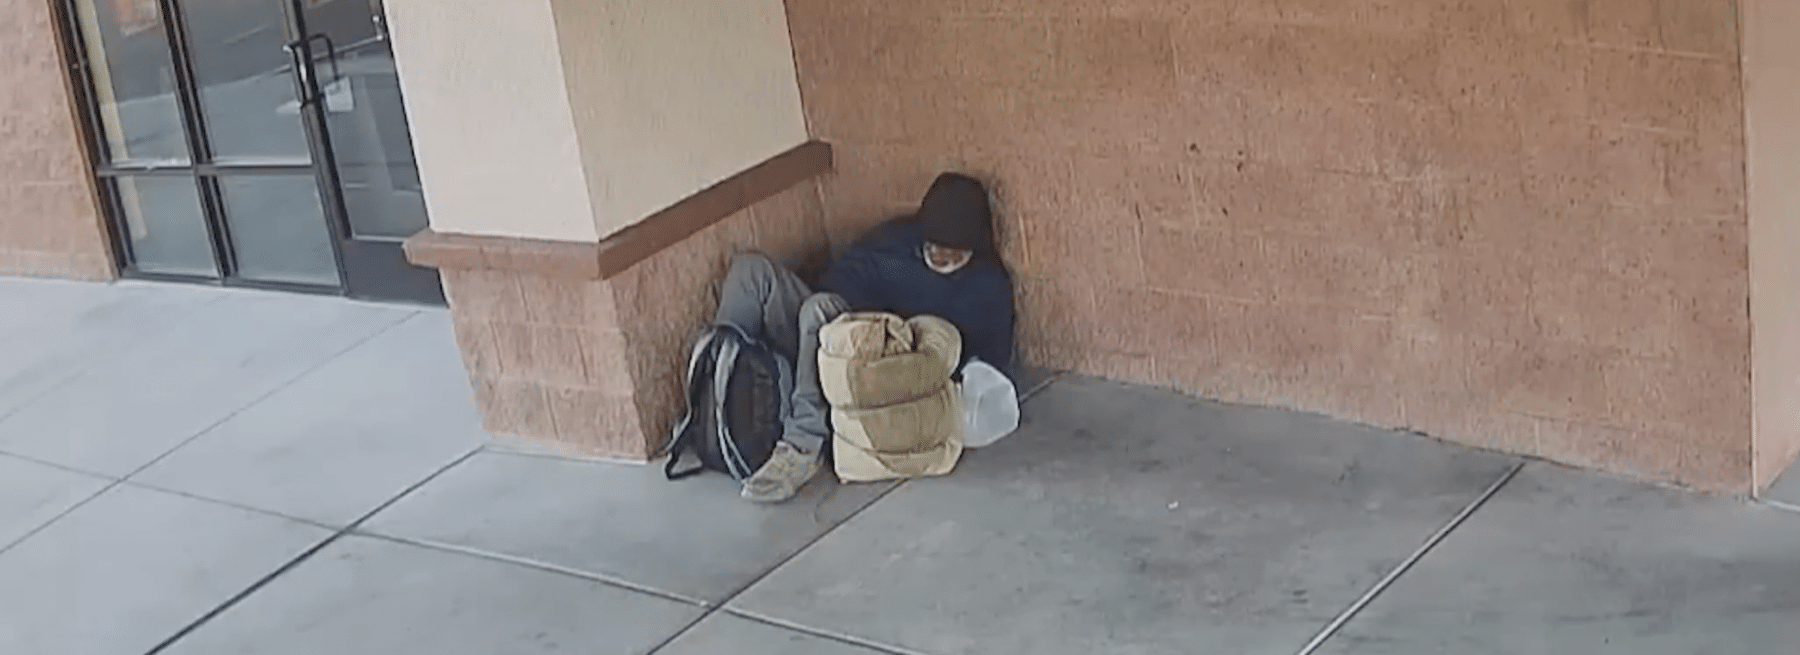 vagrancy issue at Nevada shopping center